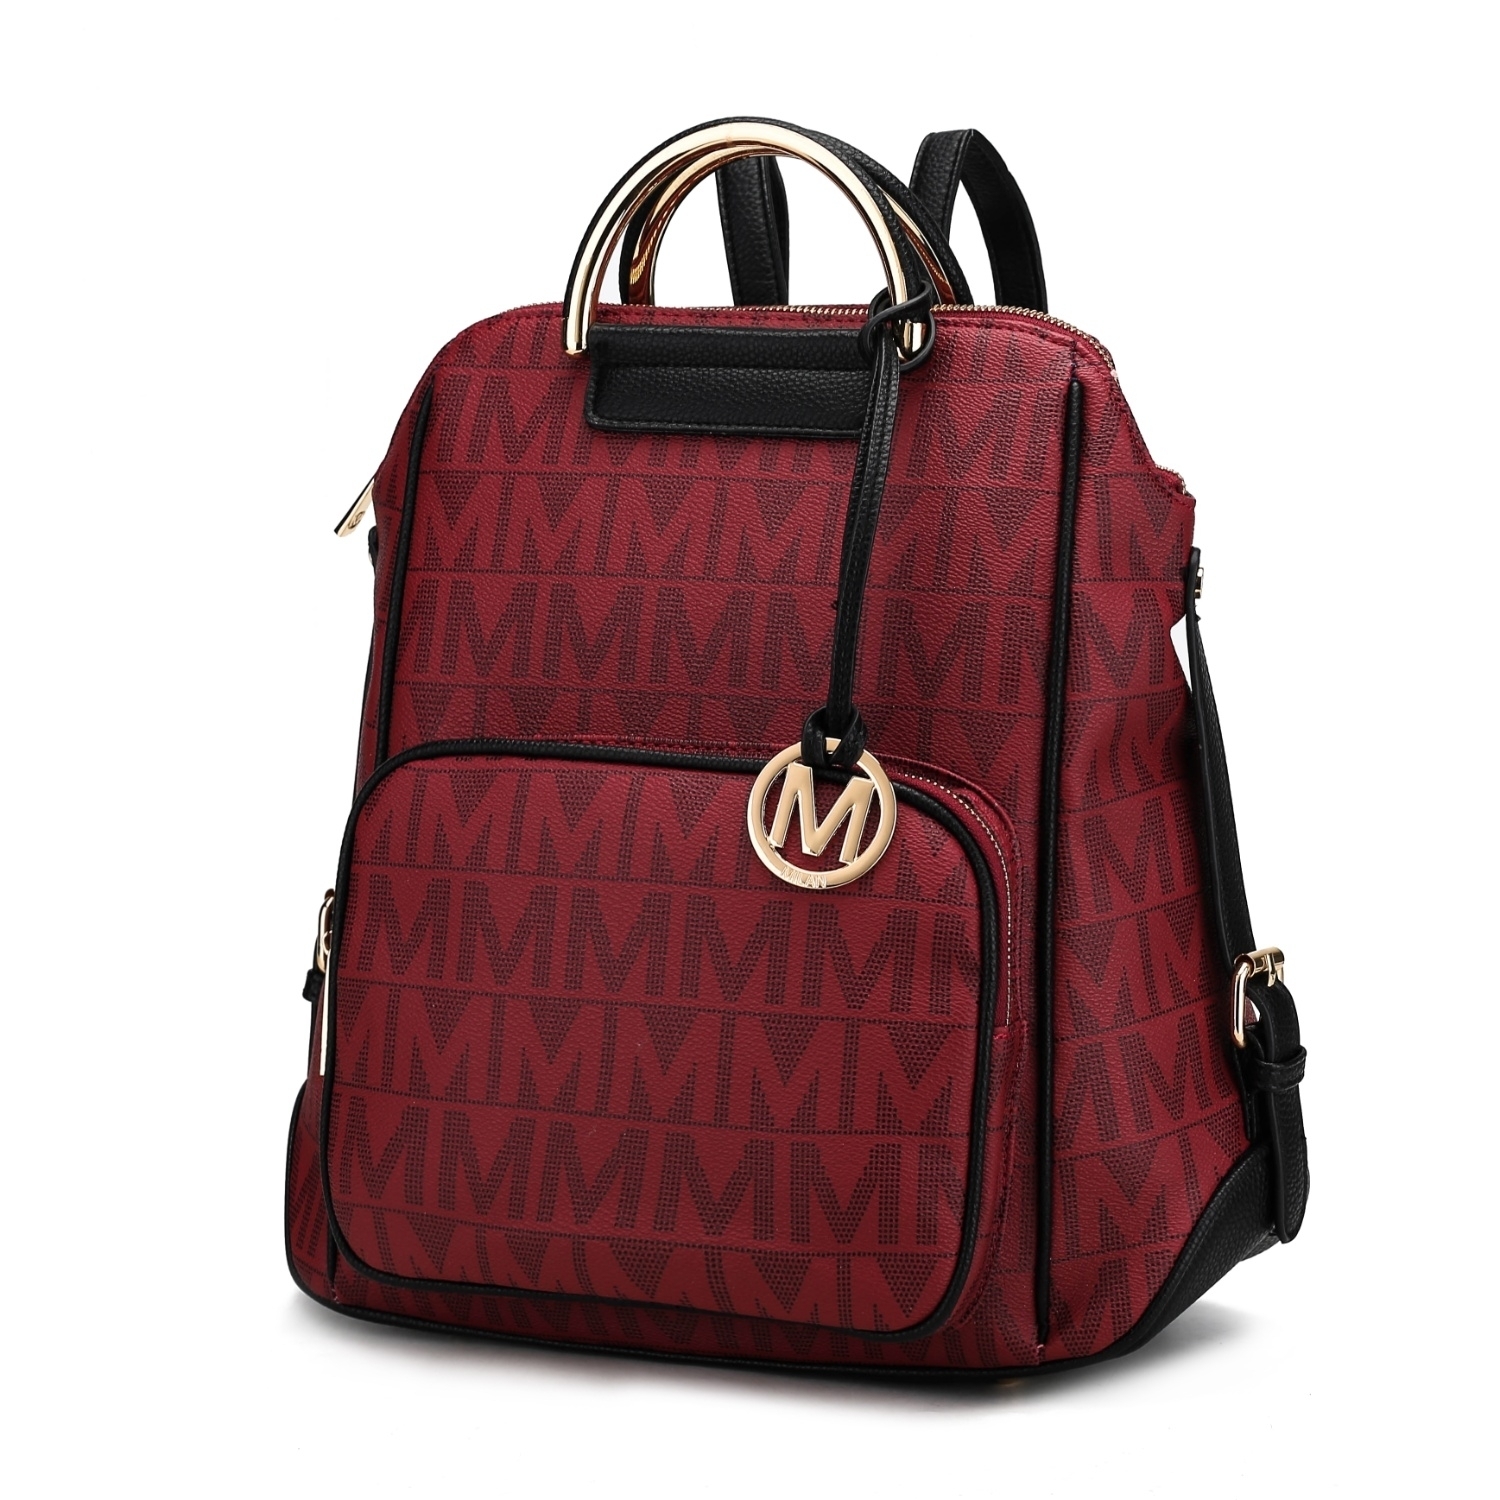 MKF Collection Cora Milan M Signature Trendy Backpack By Mia K. - Burgundy